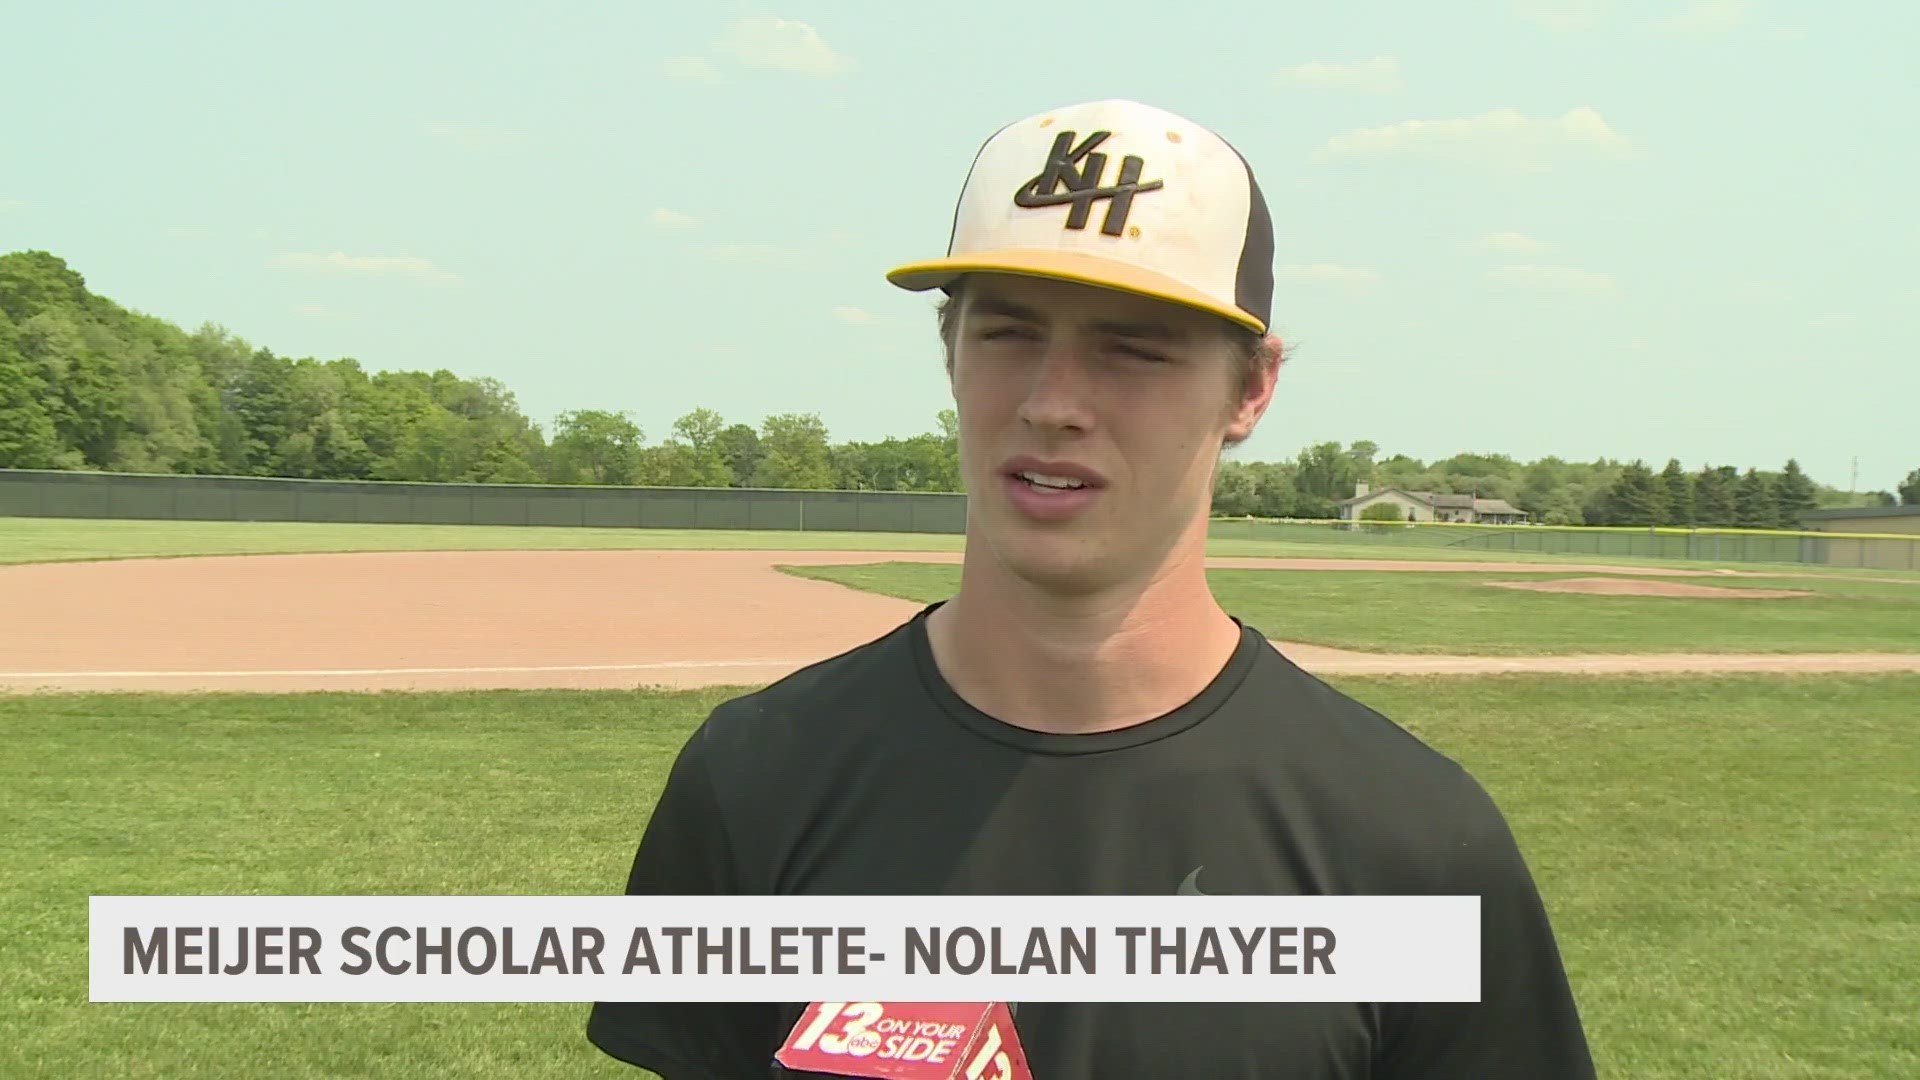 Thayer is quite the wiz kid. He has a 4.118 GPA and is ranked ninth in his class.